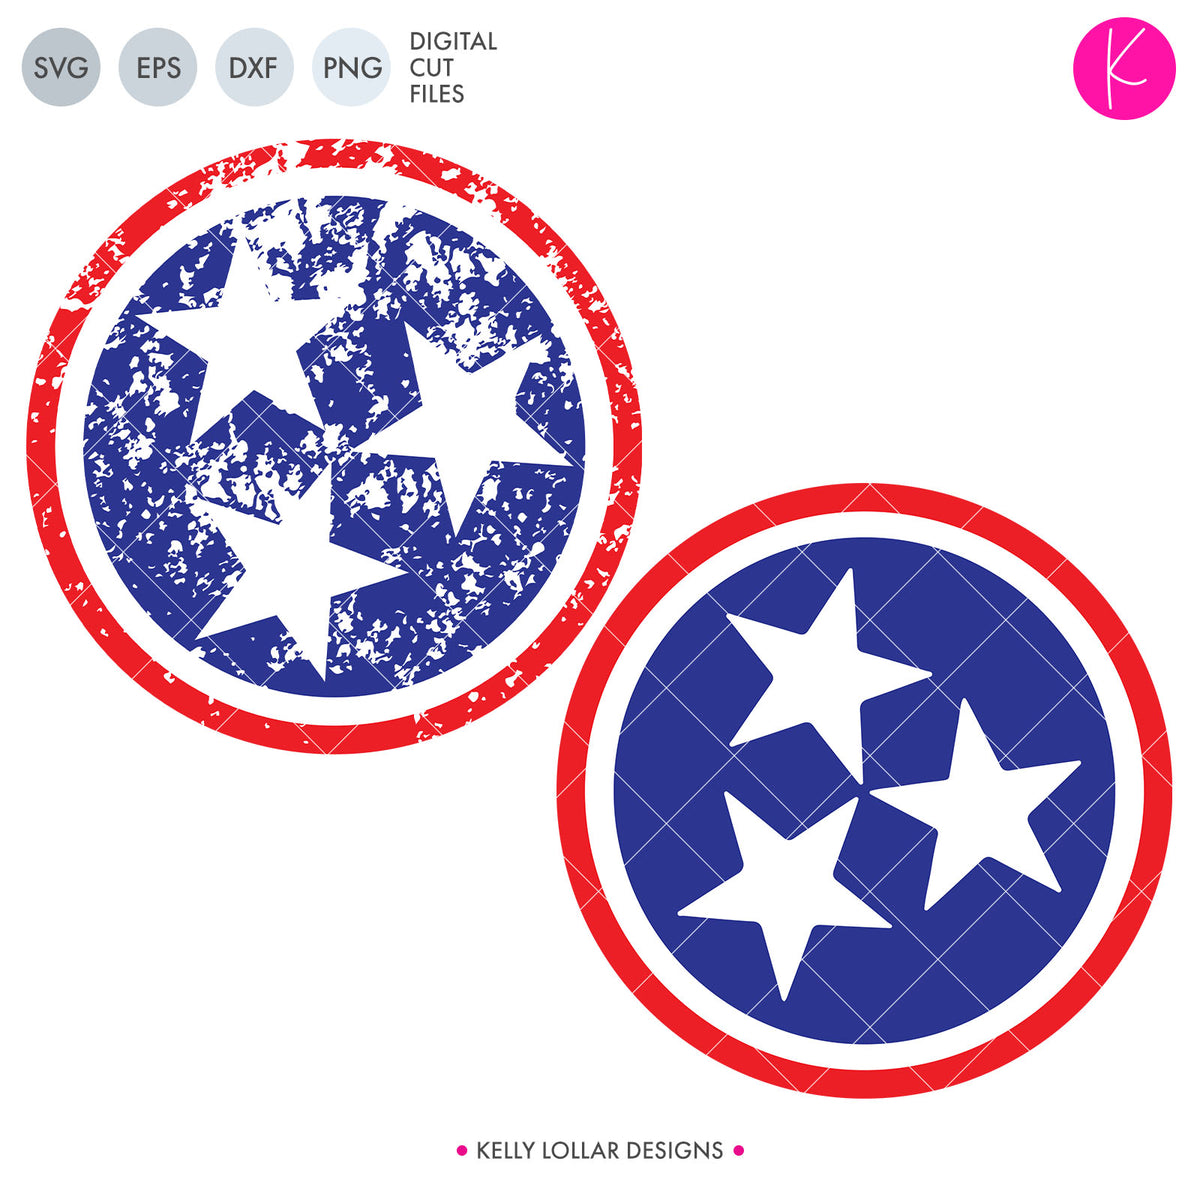 Tennessee State Bundle | SVG DXF EPS PNG Cut Files